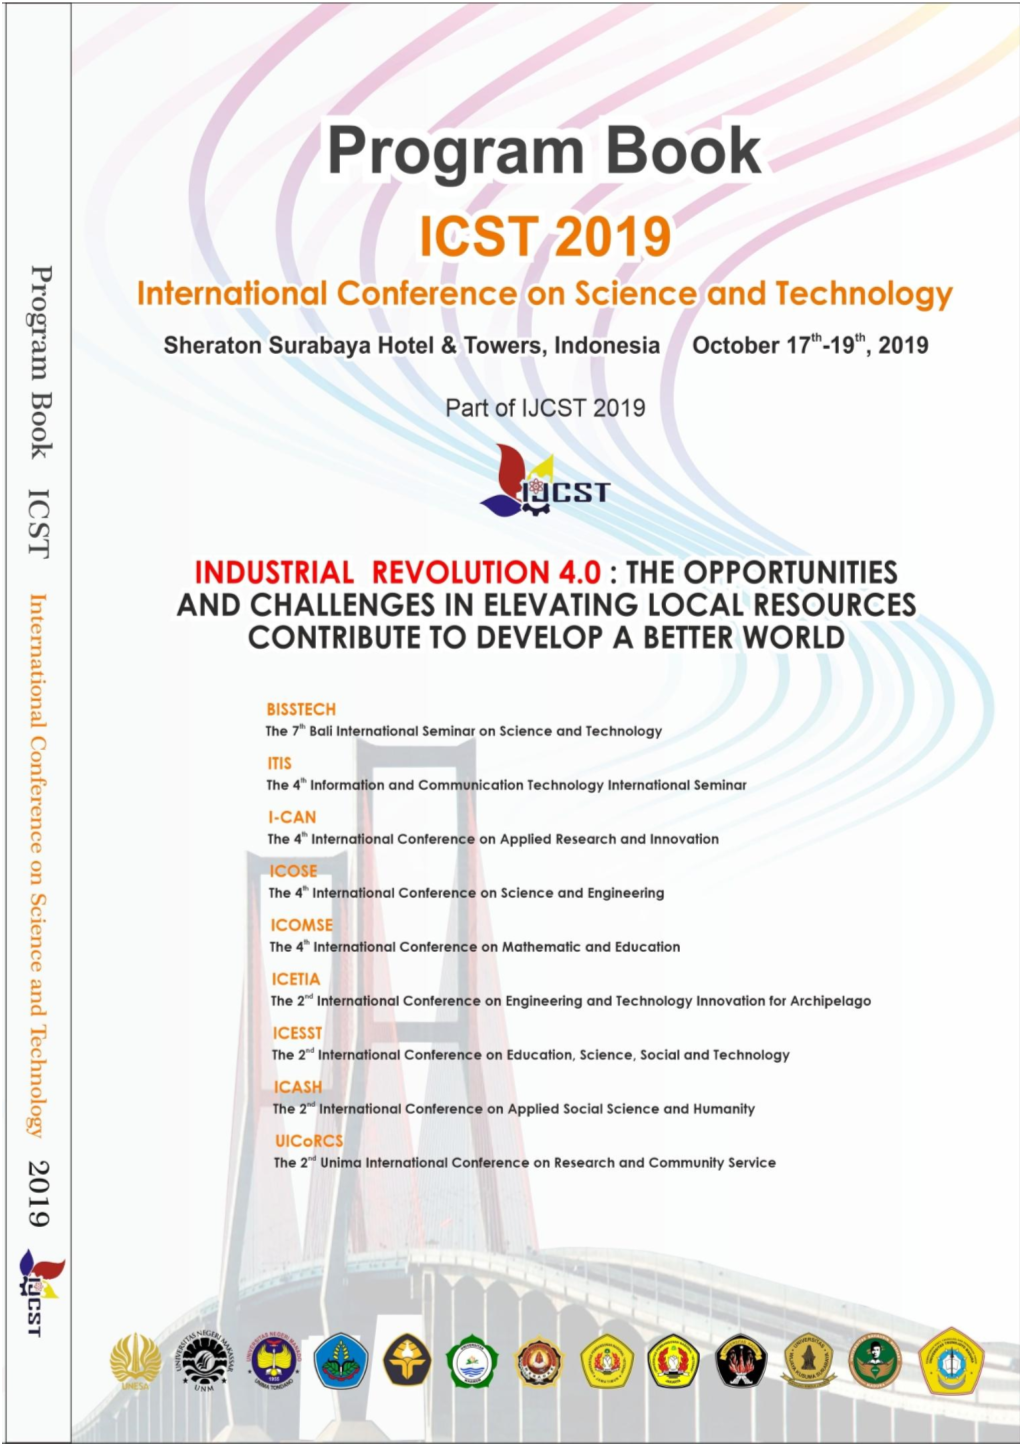 International Conference on Science and Technology (Icst) 2019